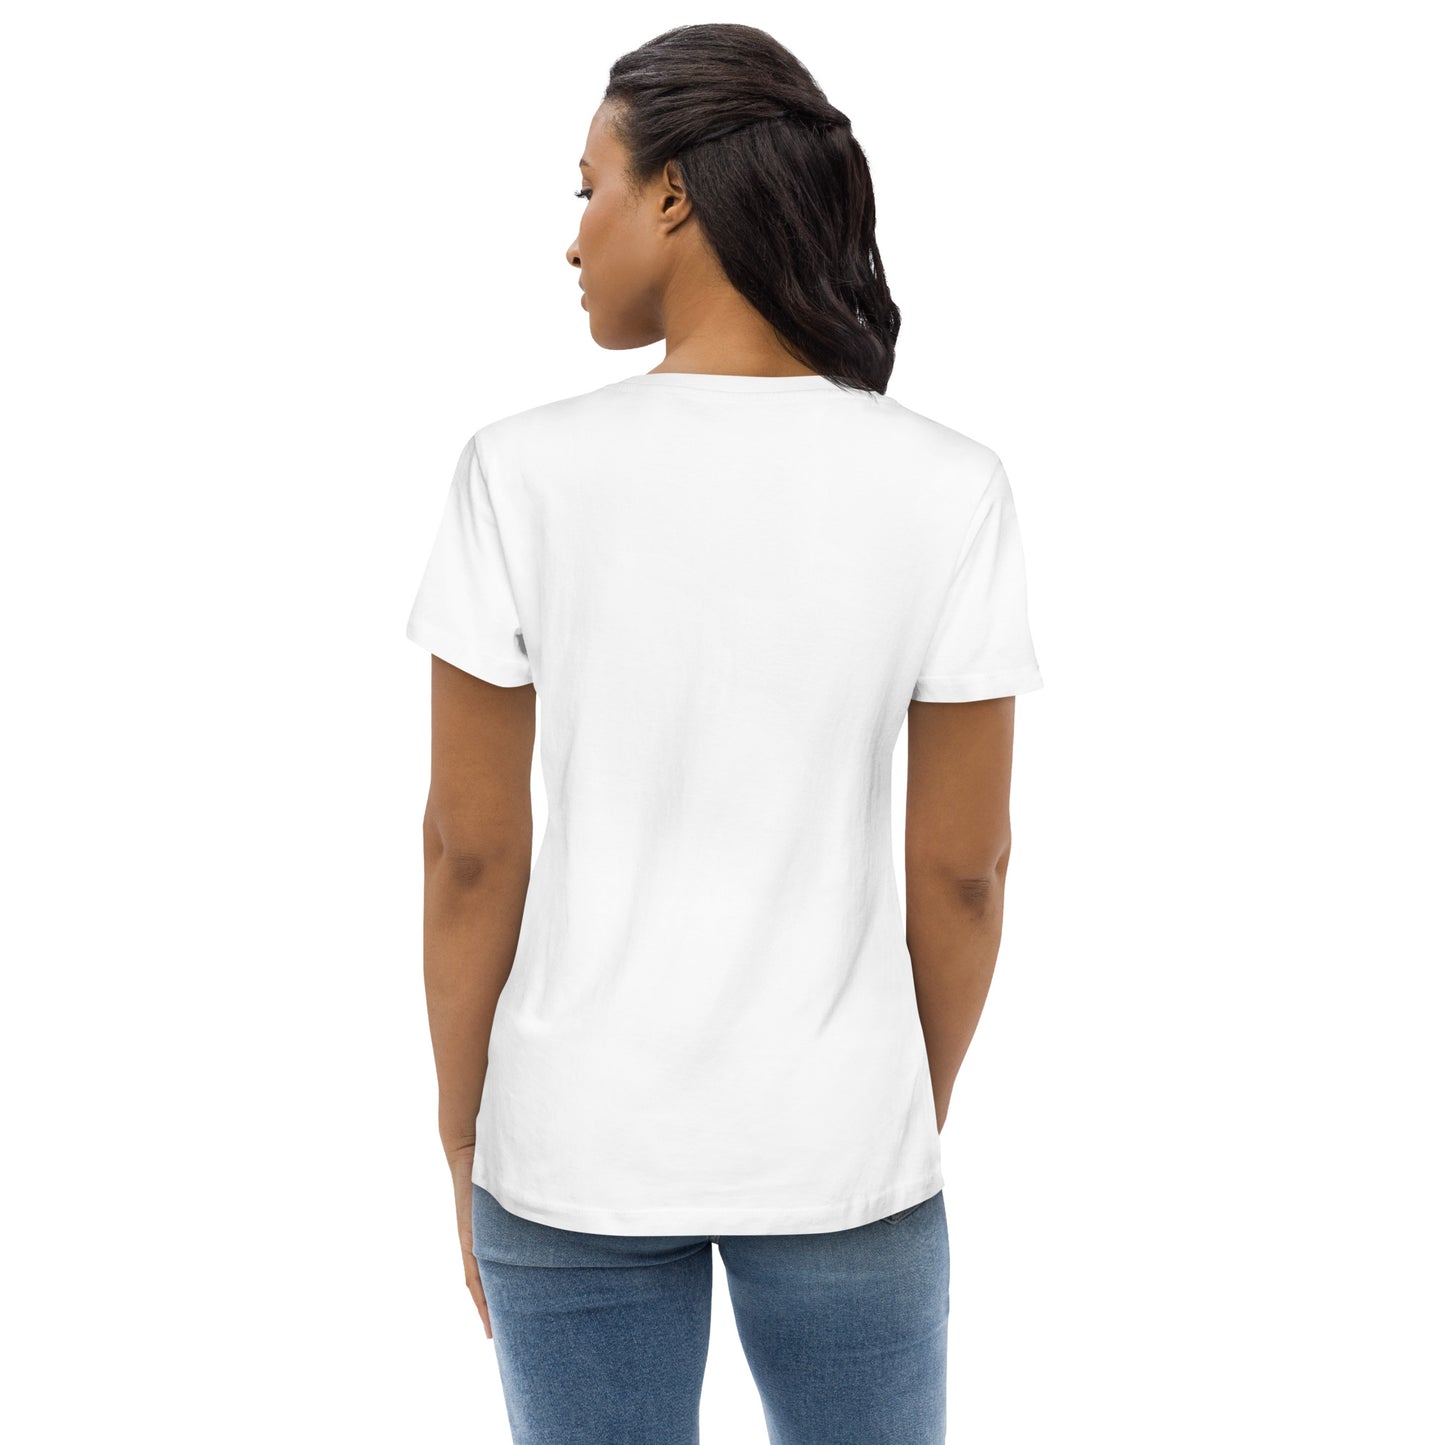 ONE AT A TIME Women's Tee